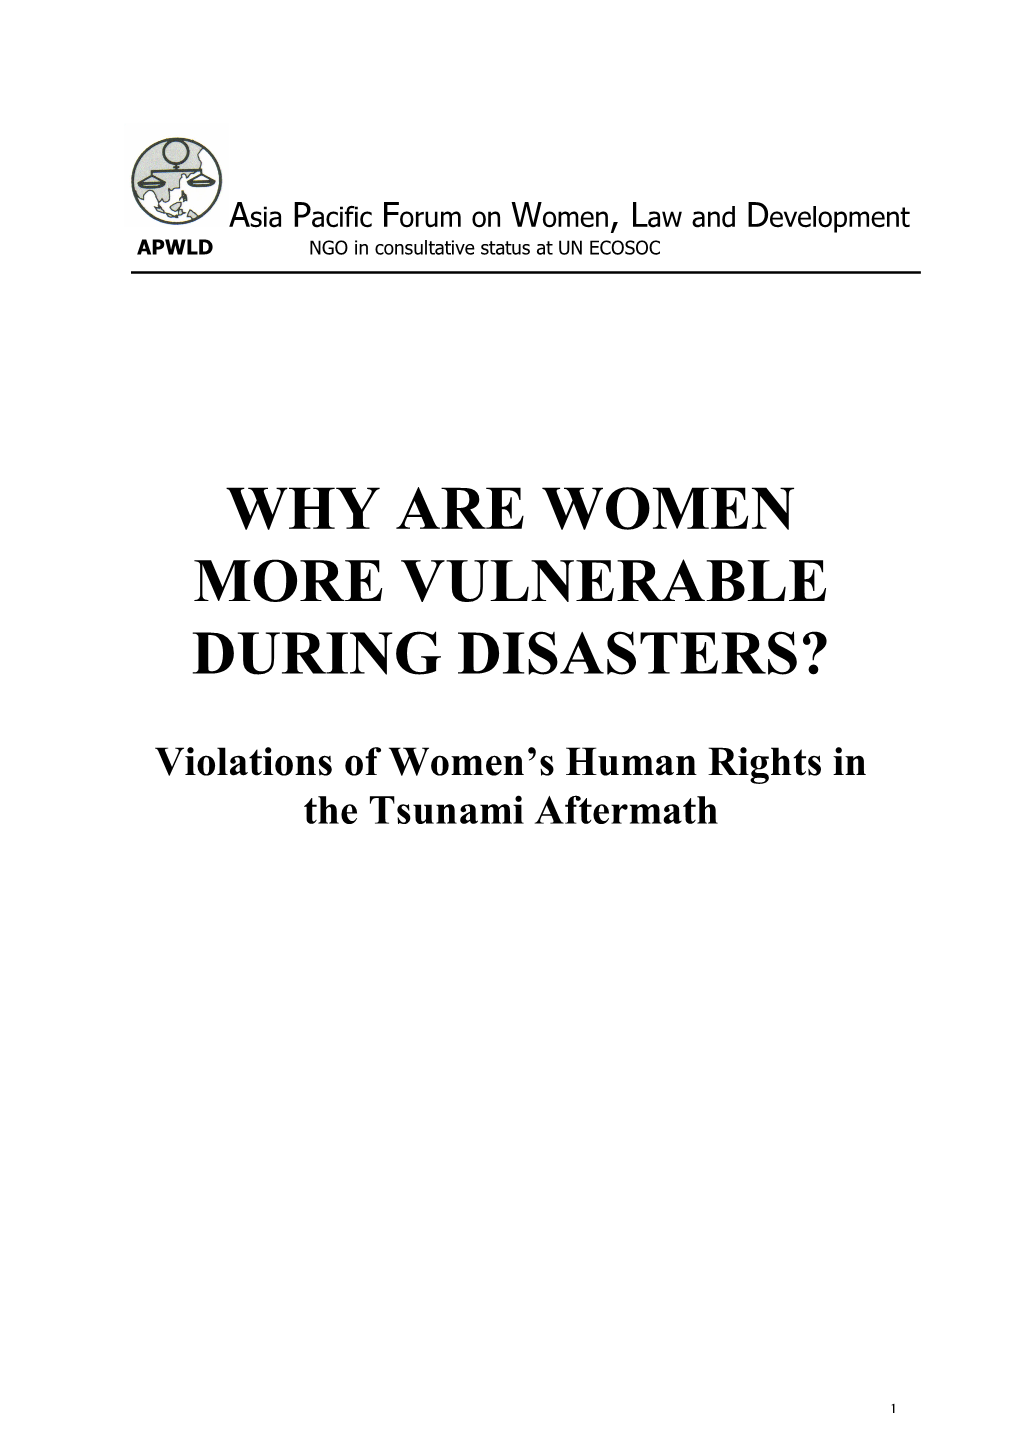 Why Are Women More Vulnerable During Disasters?